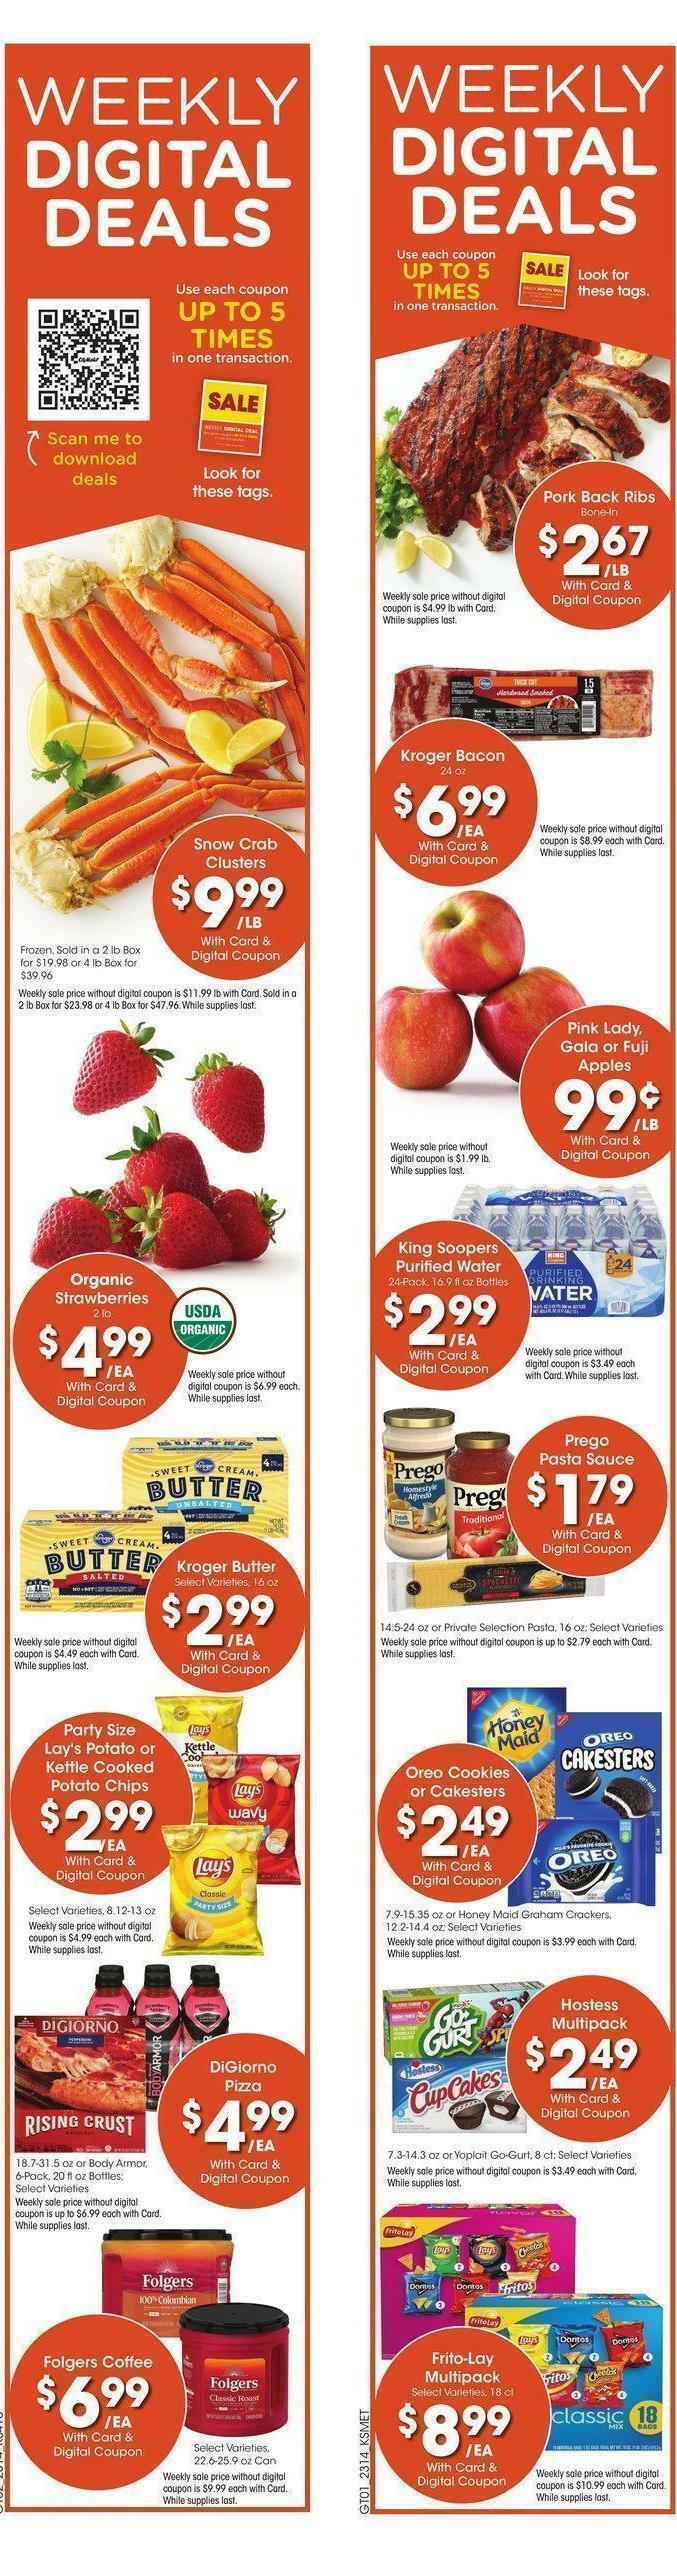 City Market Weekly Ad from May 3